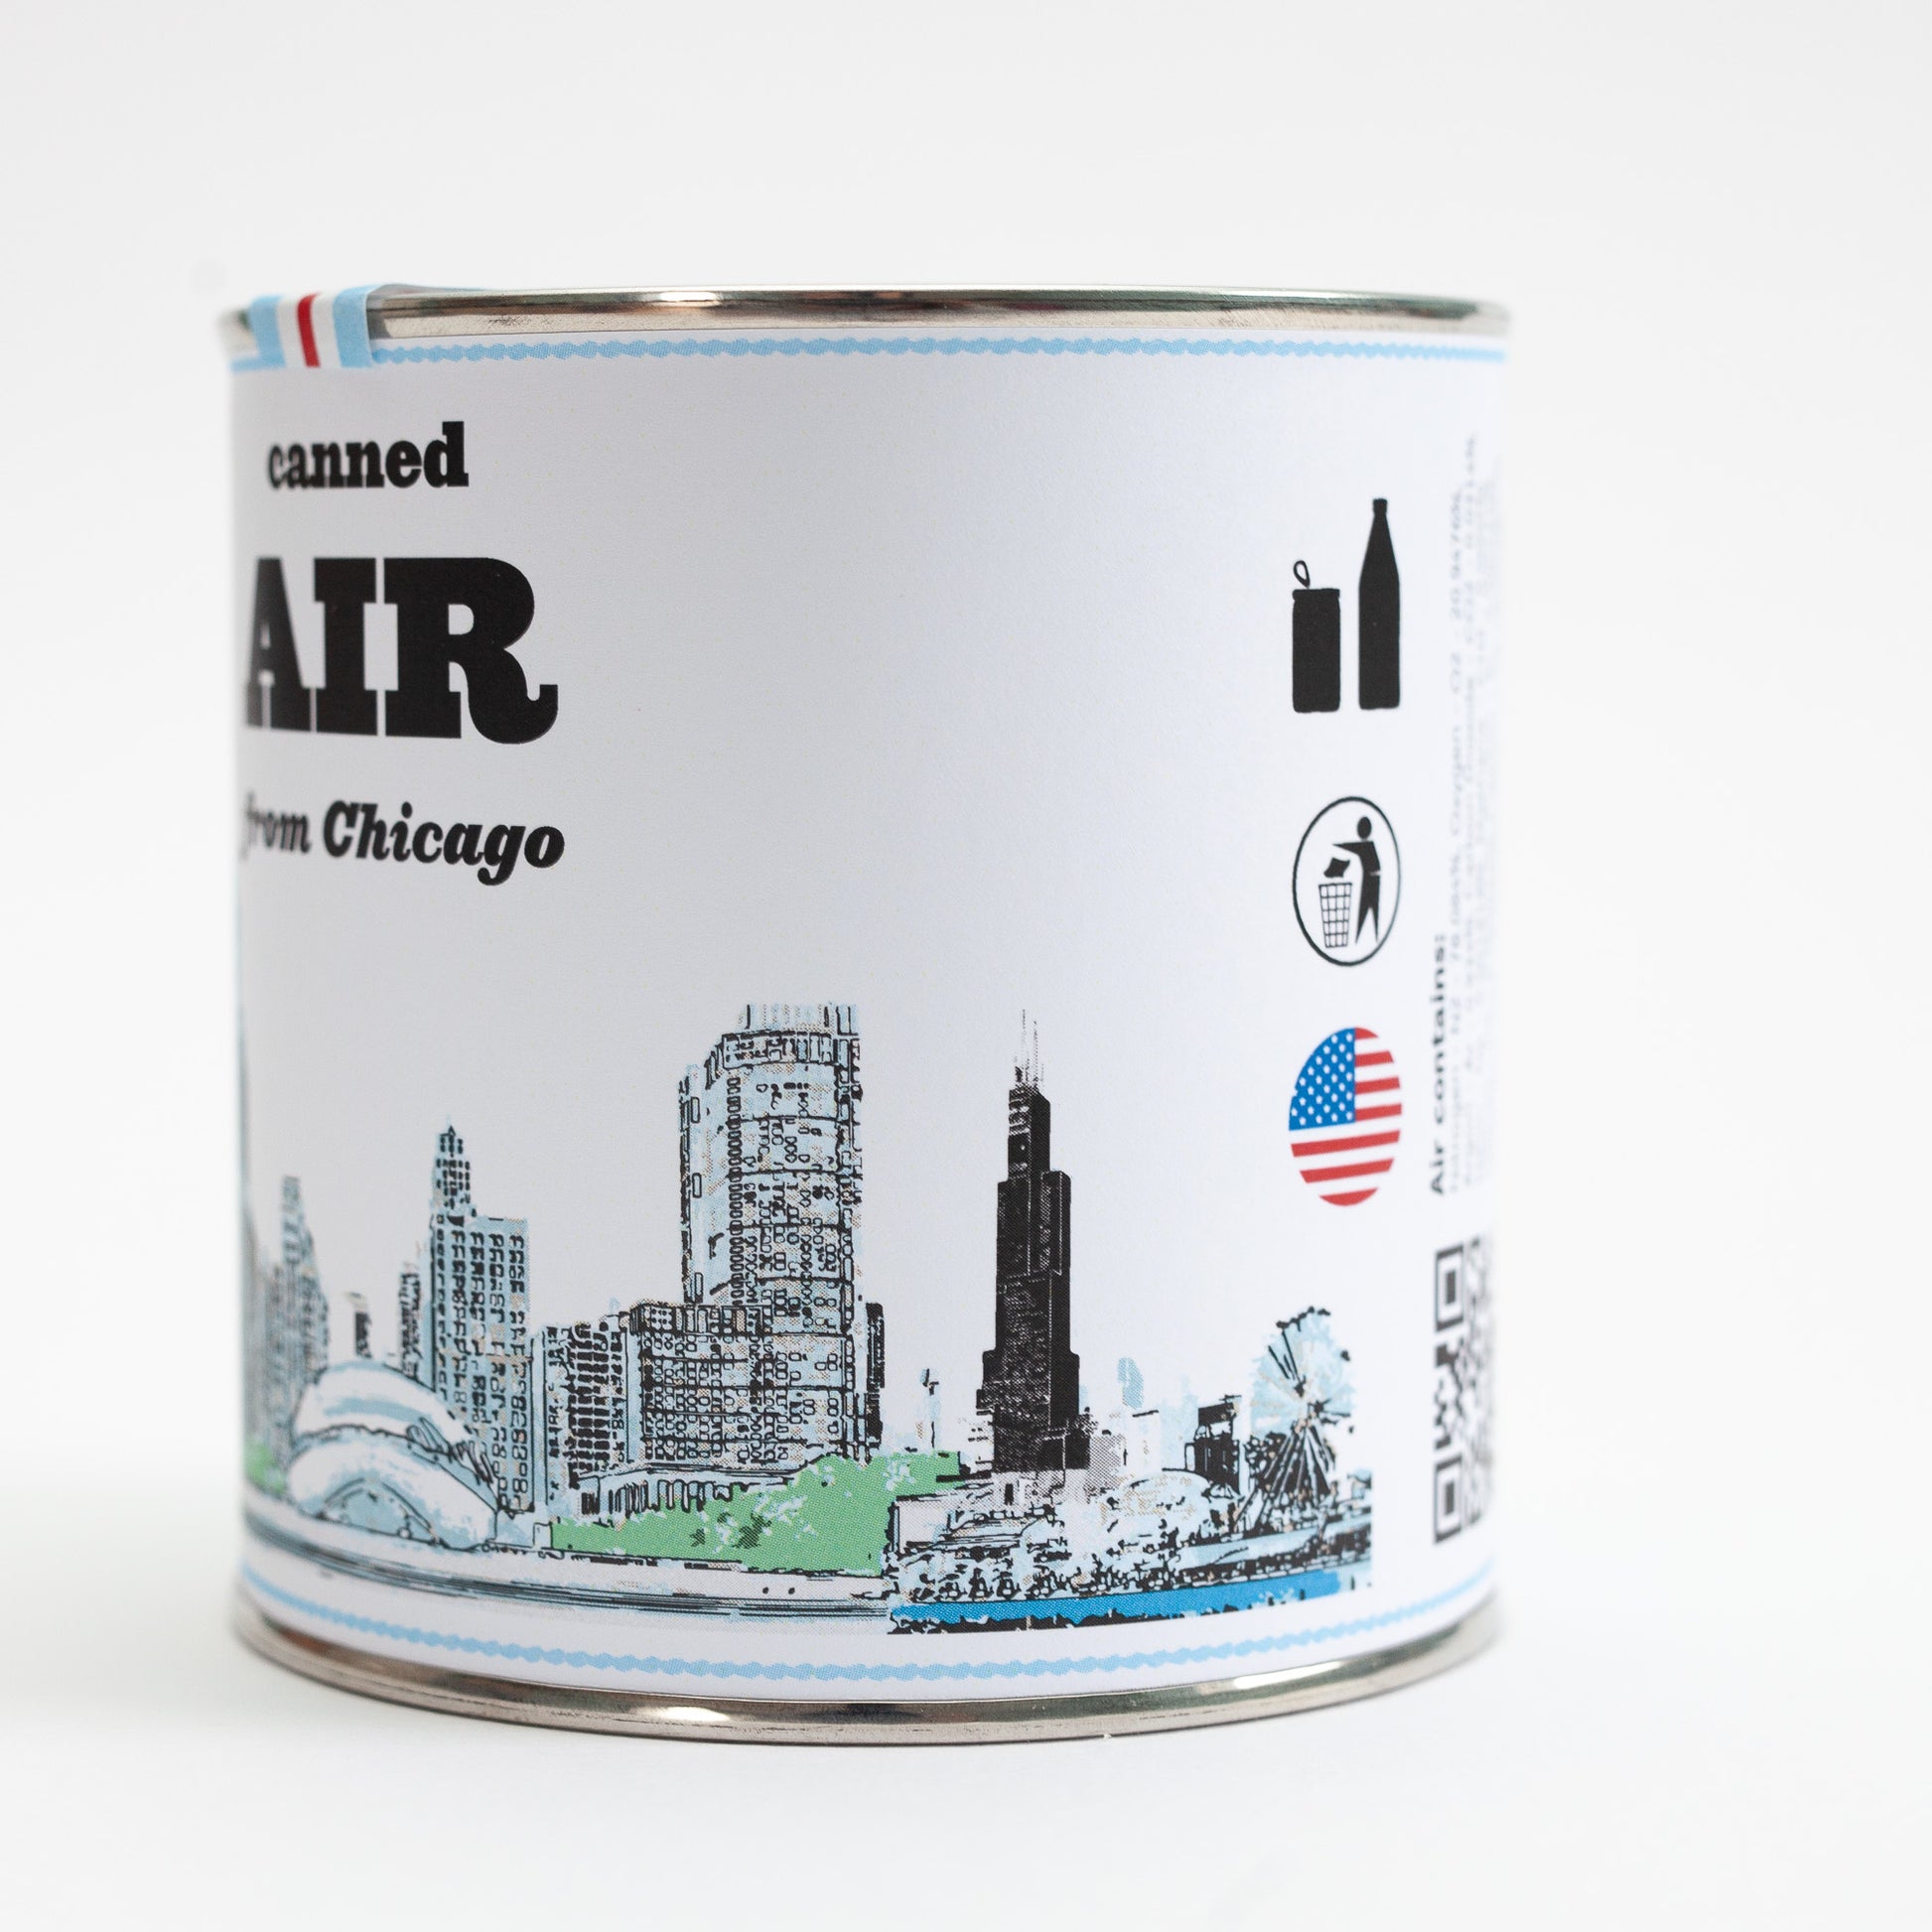 Air in the Can from Chicago